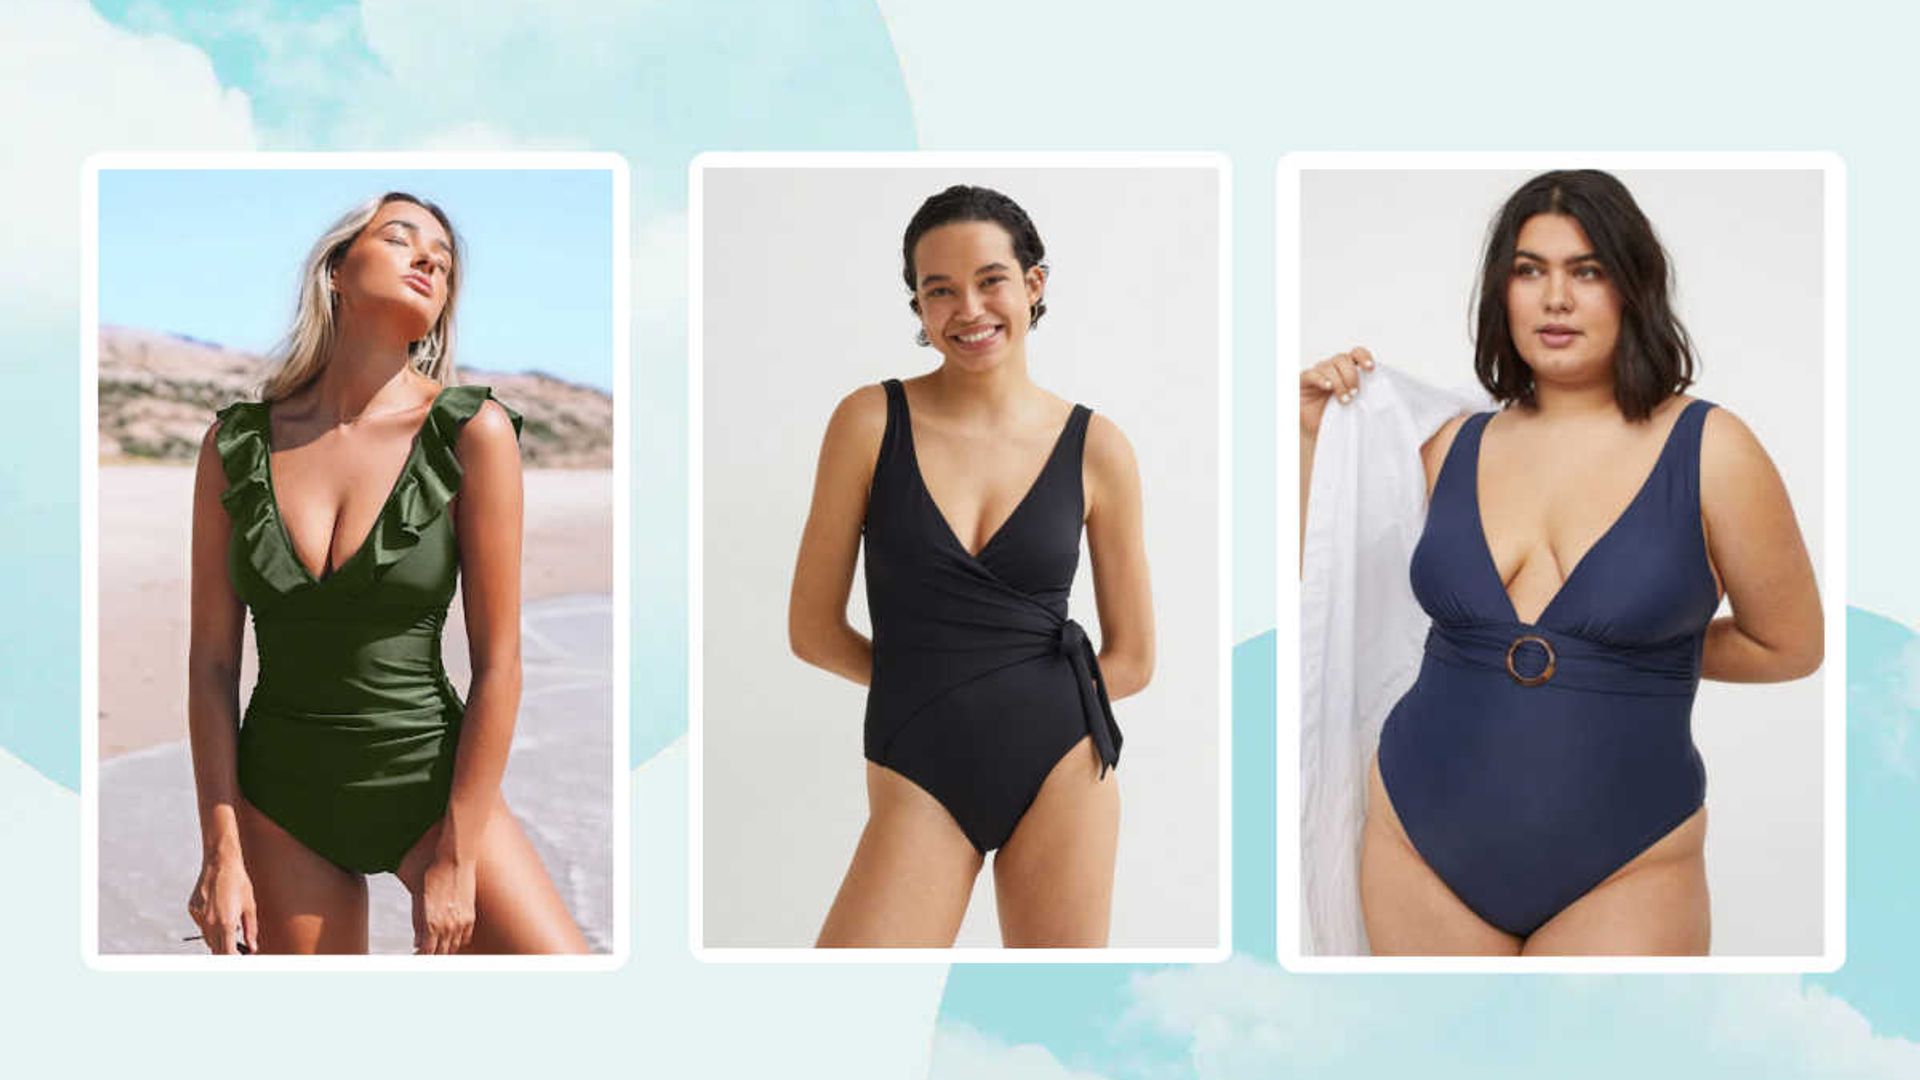 17 swimsuits with tummy control: Flattering body sculpting looks for beach or poolside